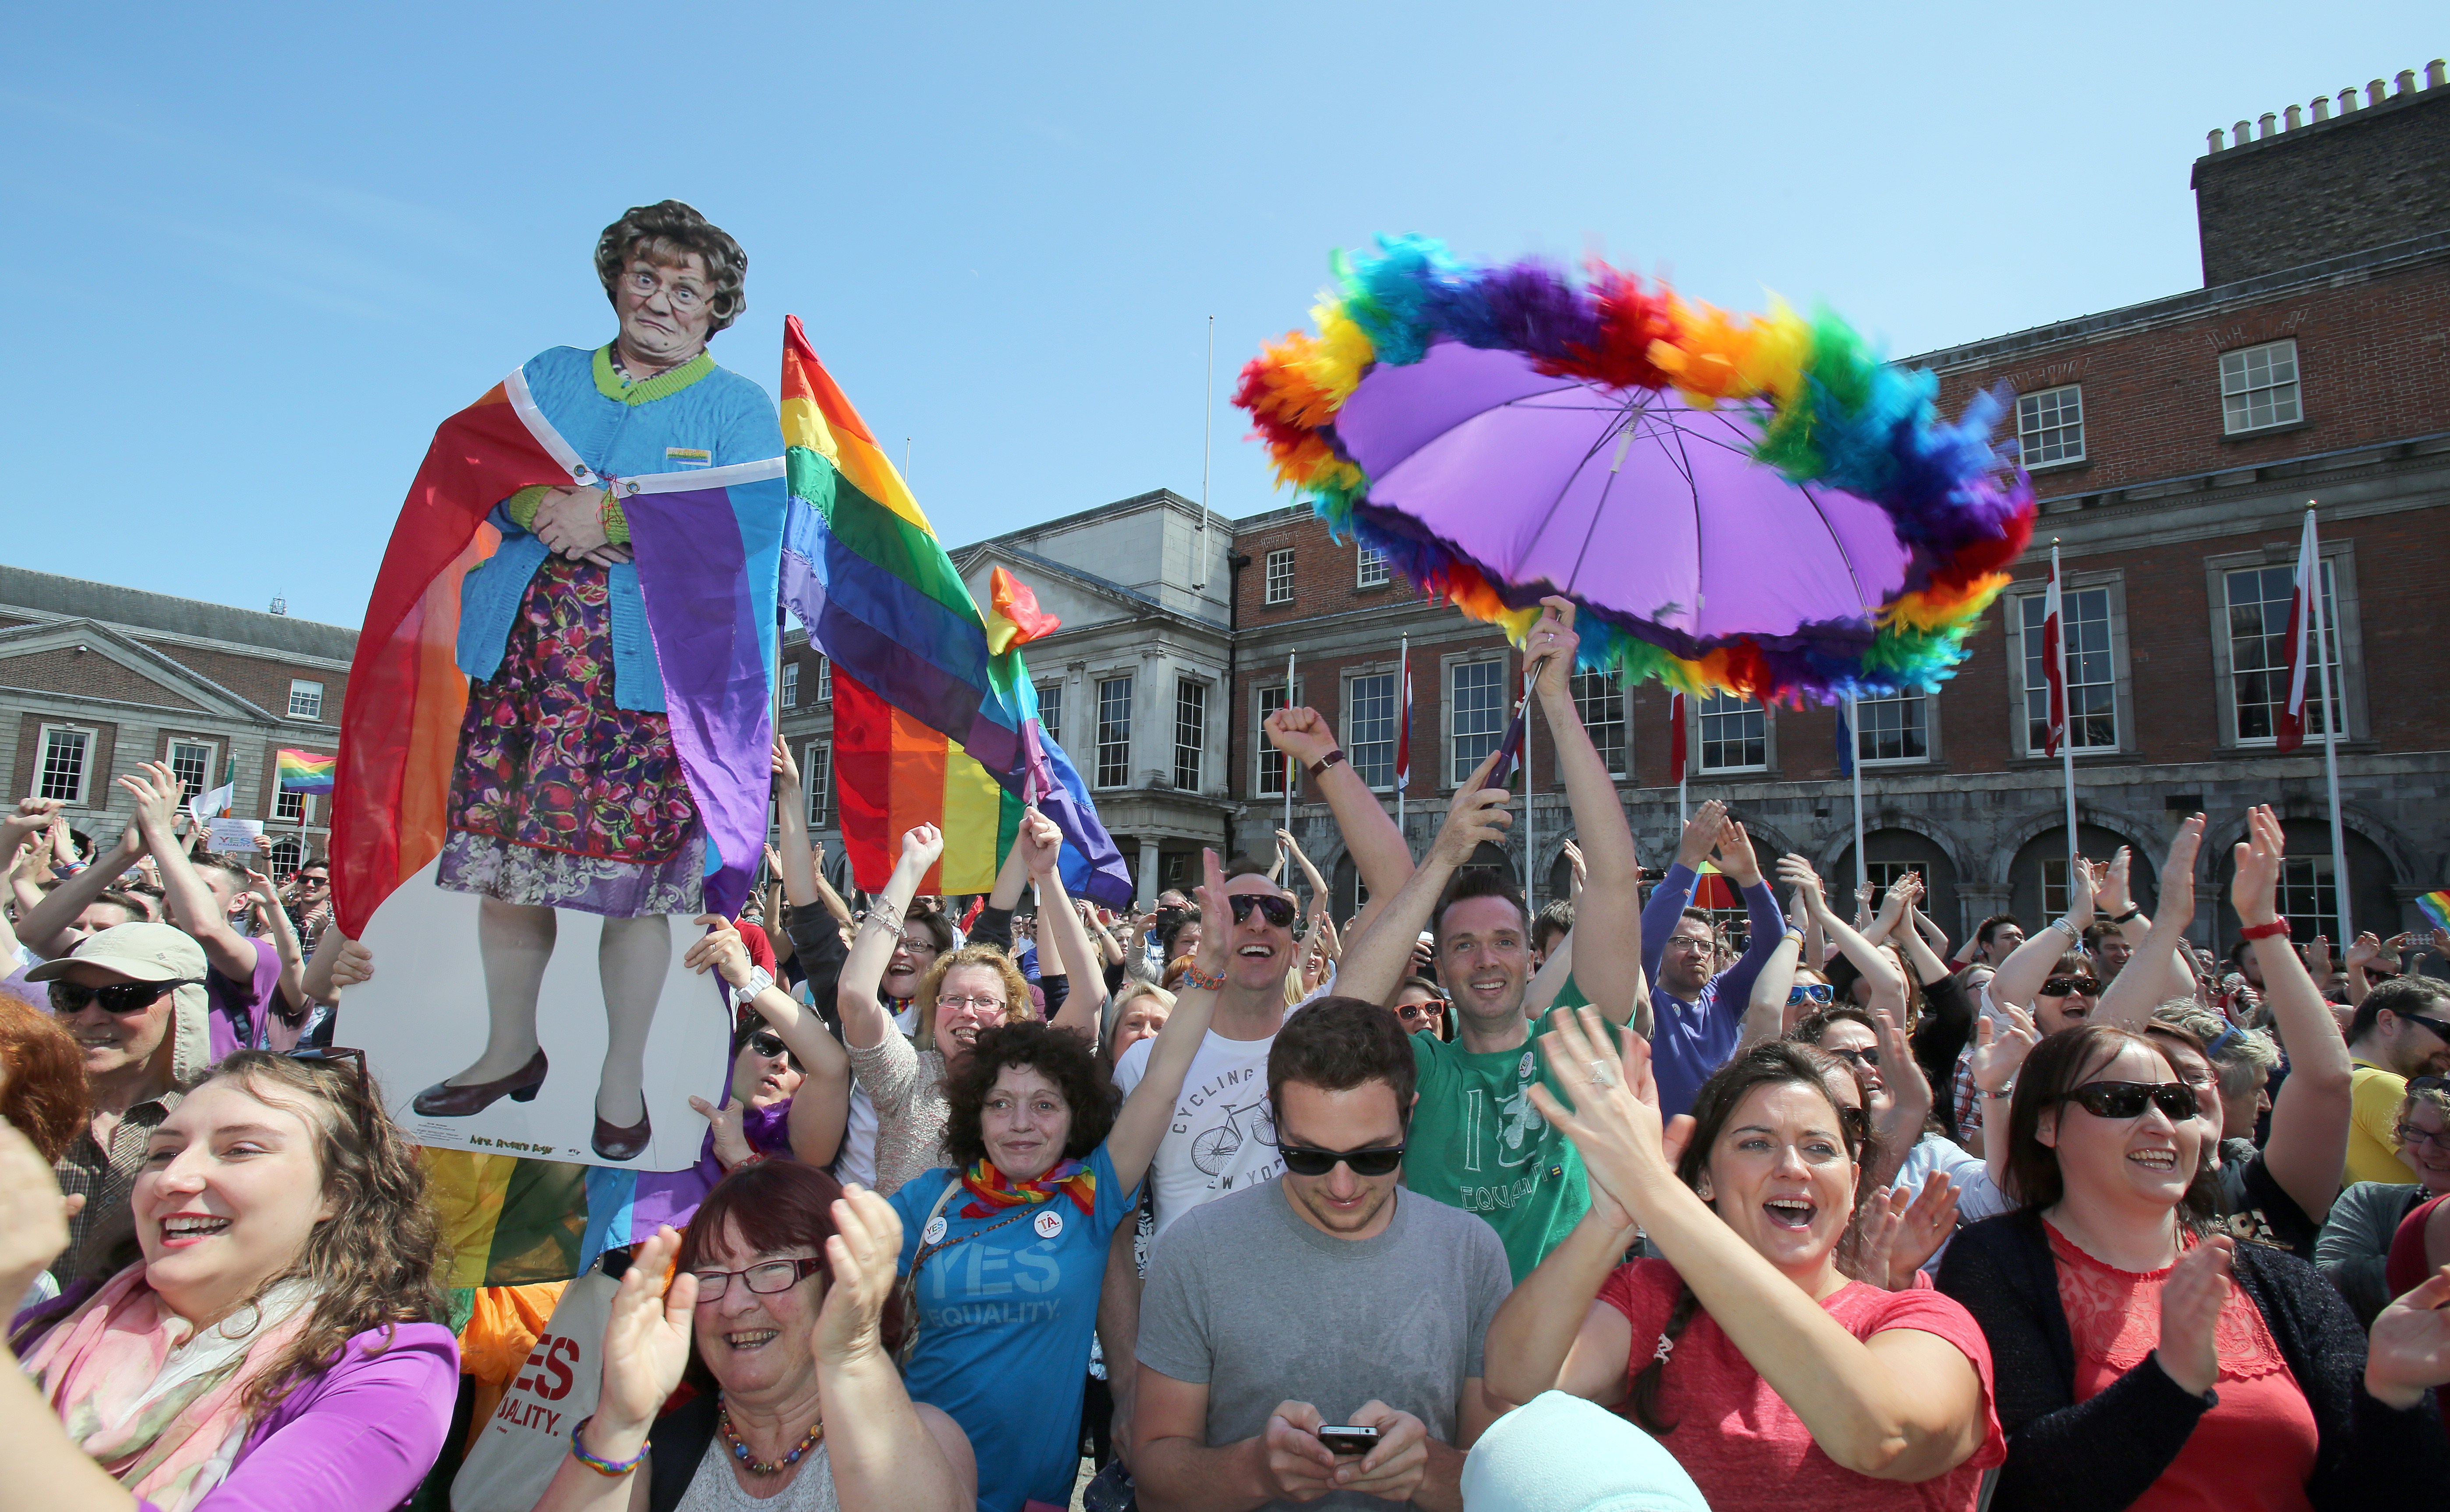 Campaigners in Ireland await result of assemblies’ same-sex marriage referendum